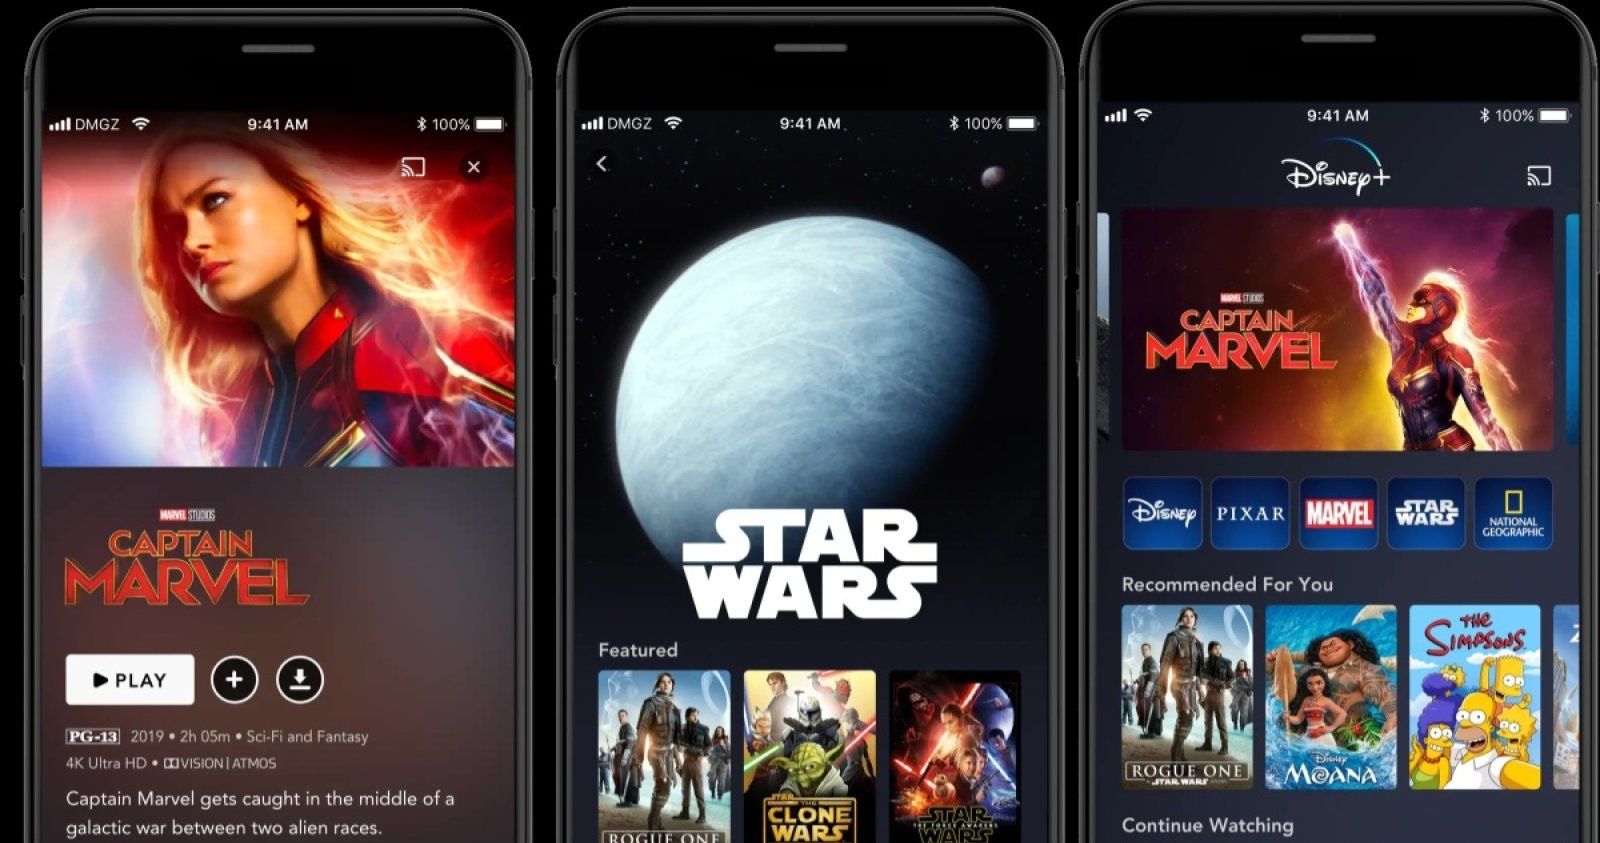 Disney+ Is Now Available for Pre-order with Free 7-Day Trial on Signup